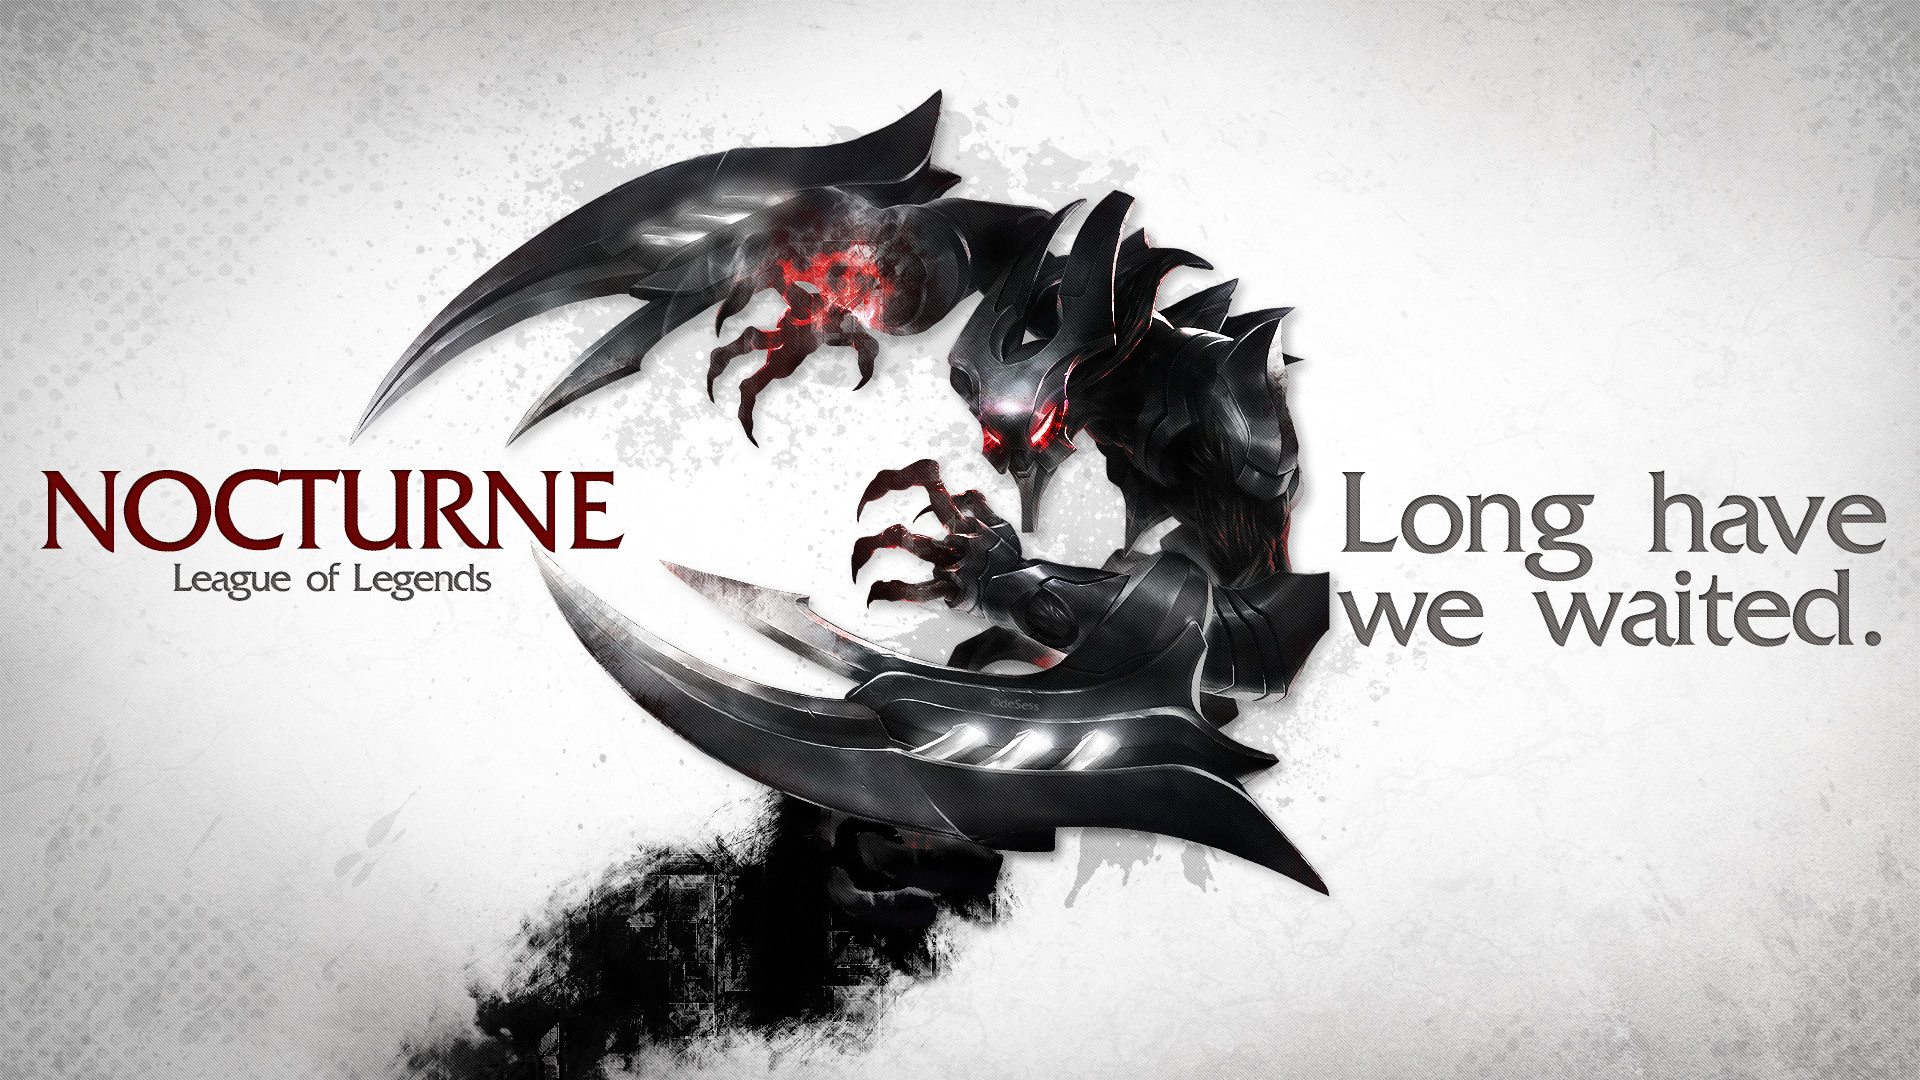 1920x1080 I think he is one of the coolest characters on League of Legends.